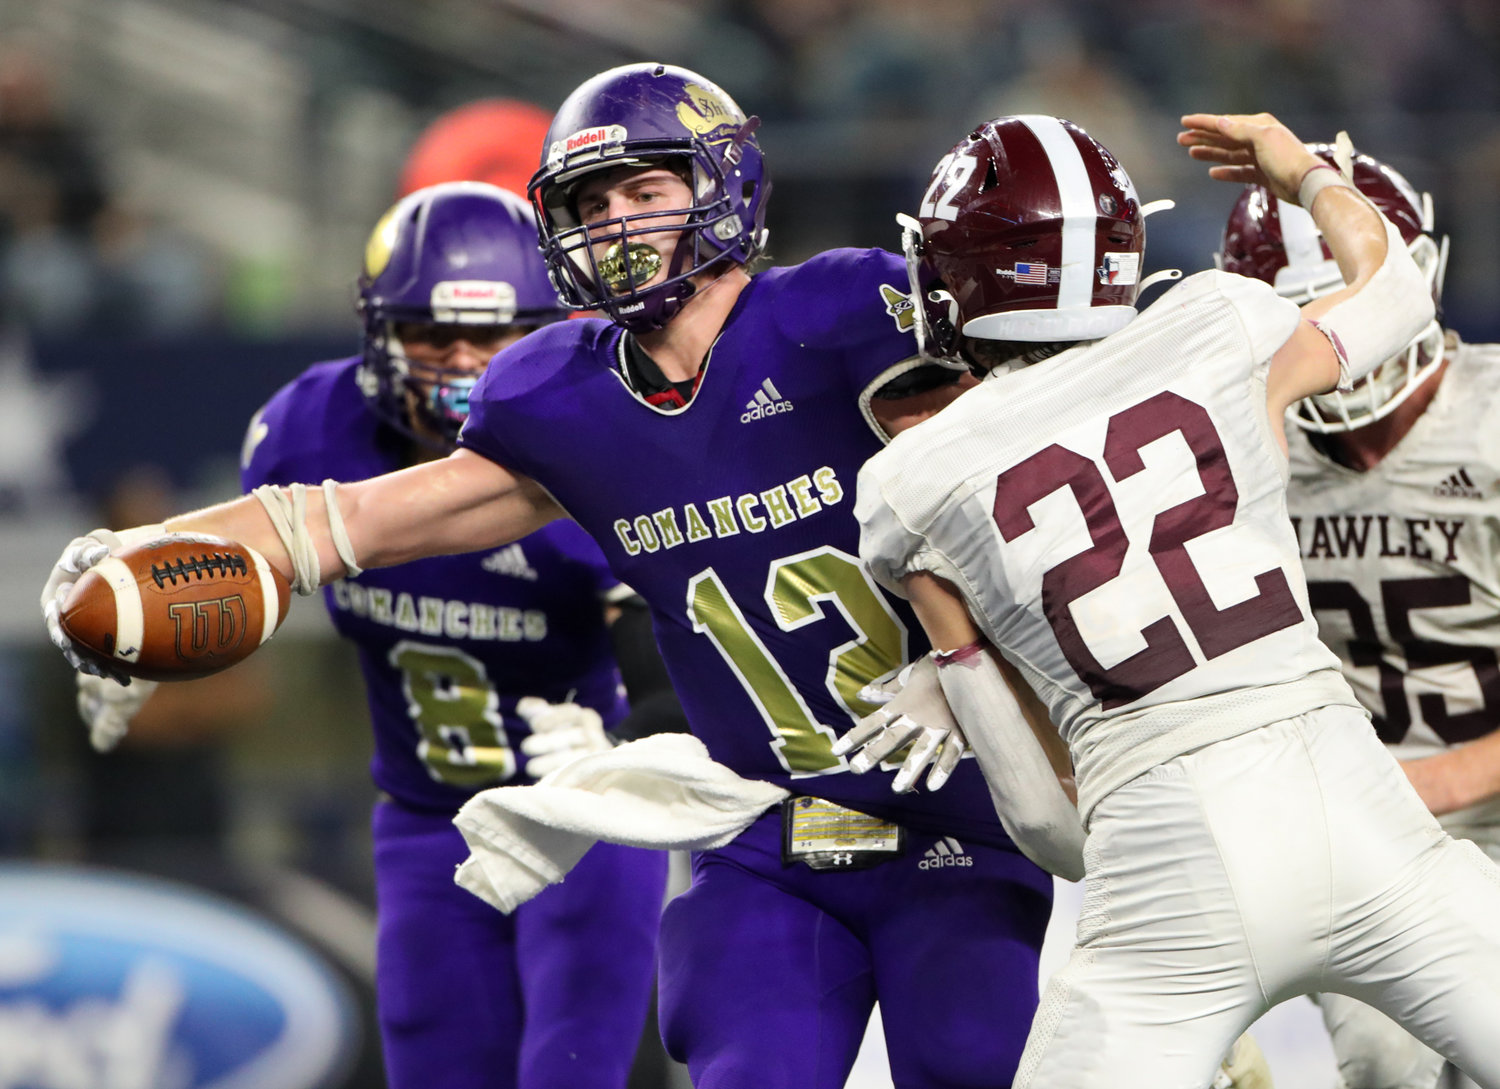 Shiner Comanches senior Tyler Bishop (12) extends the ball across the goal line for a touchdown during the Class 2A Division I state football championship game between Shiner and Hawley on December 15, 2021 in Arlington, Texas.